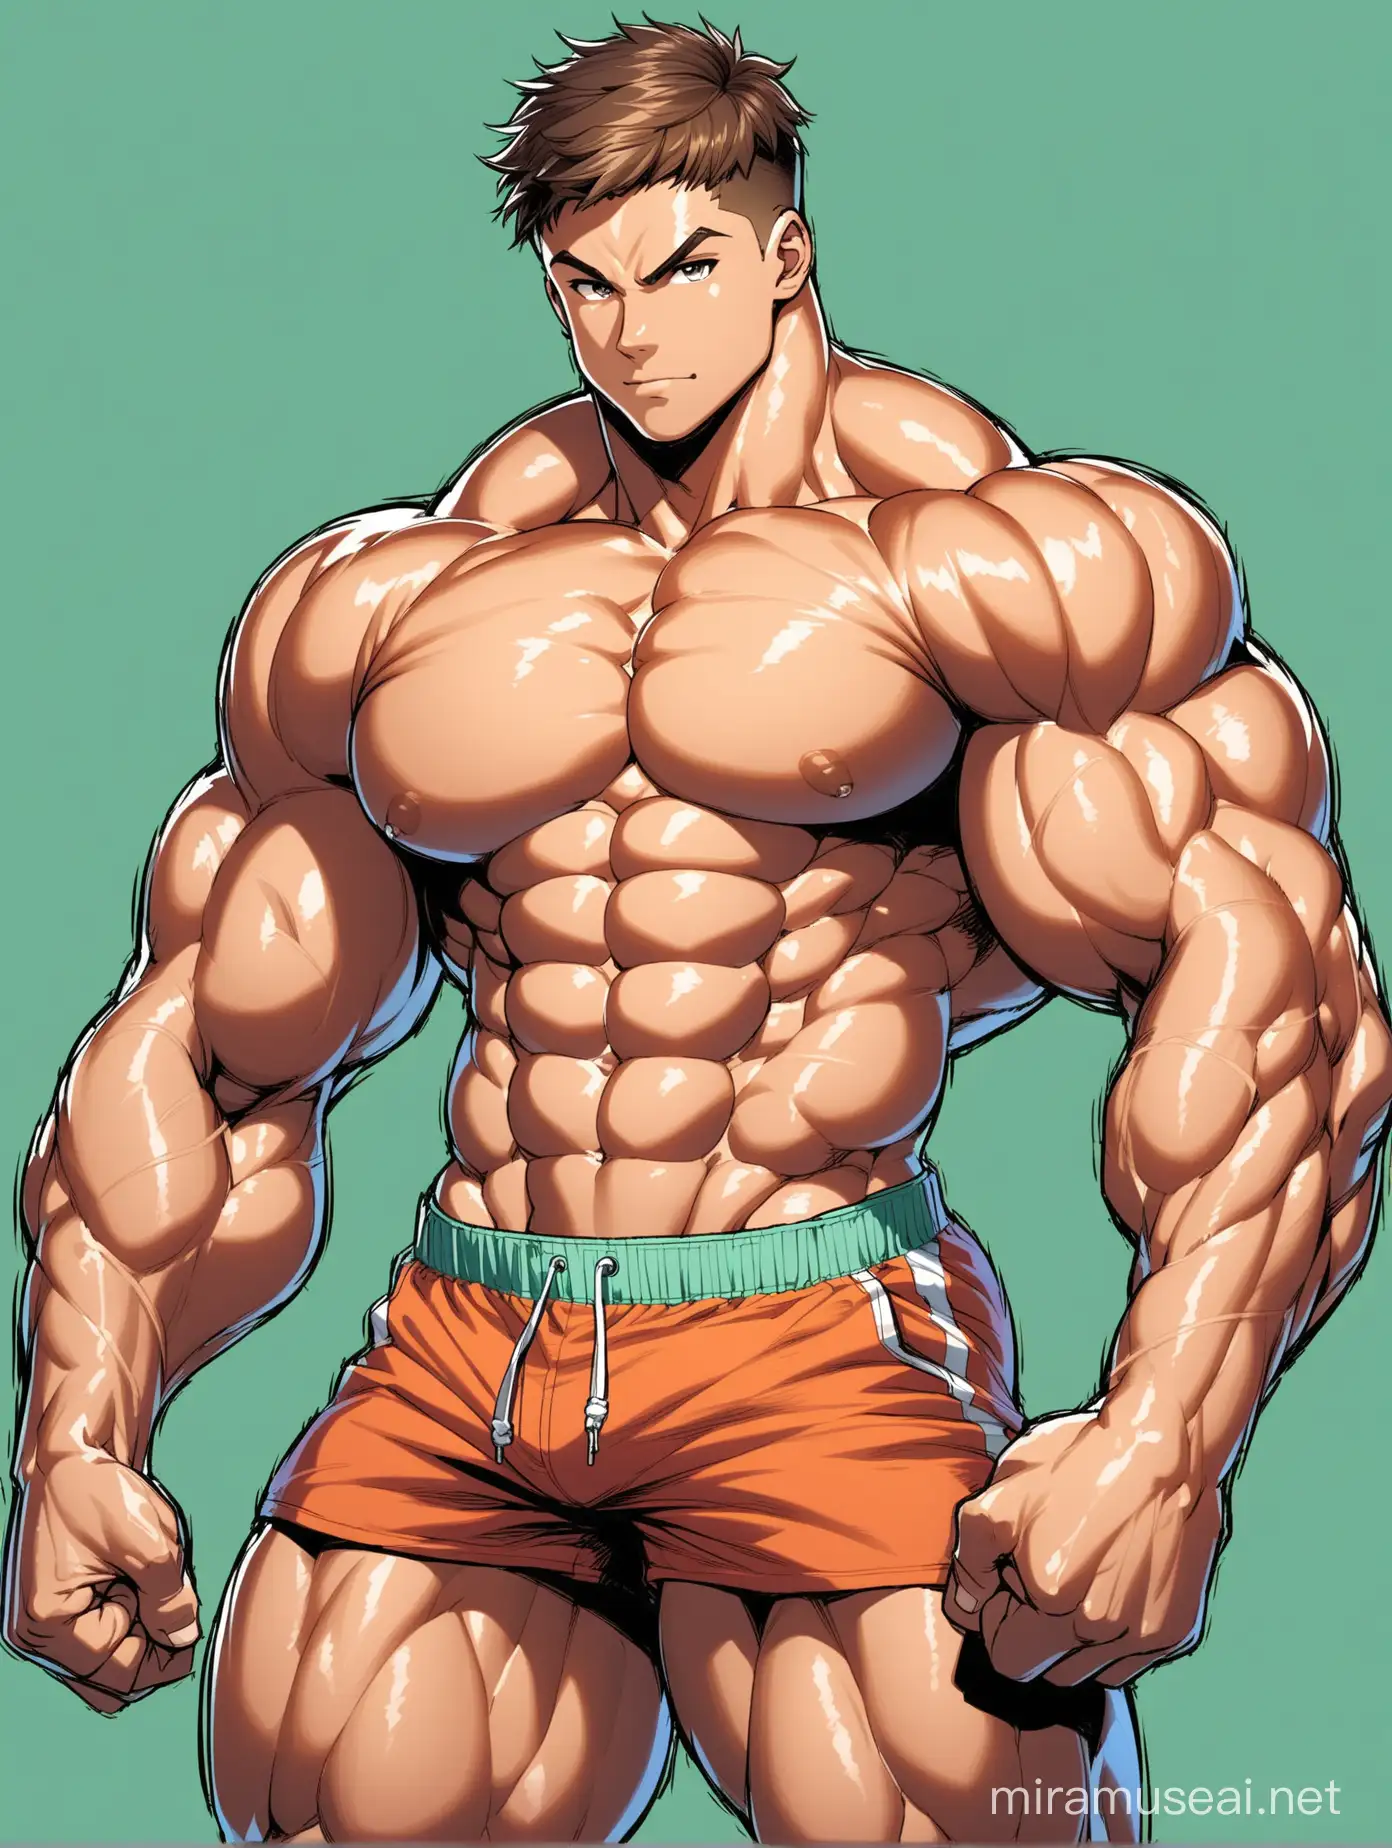 Muscular Teenage Male Flexing His Powerful Physique in Colorful Illustration